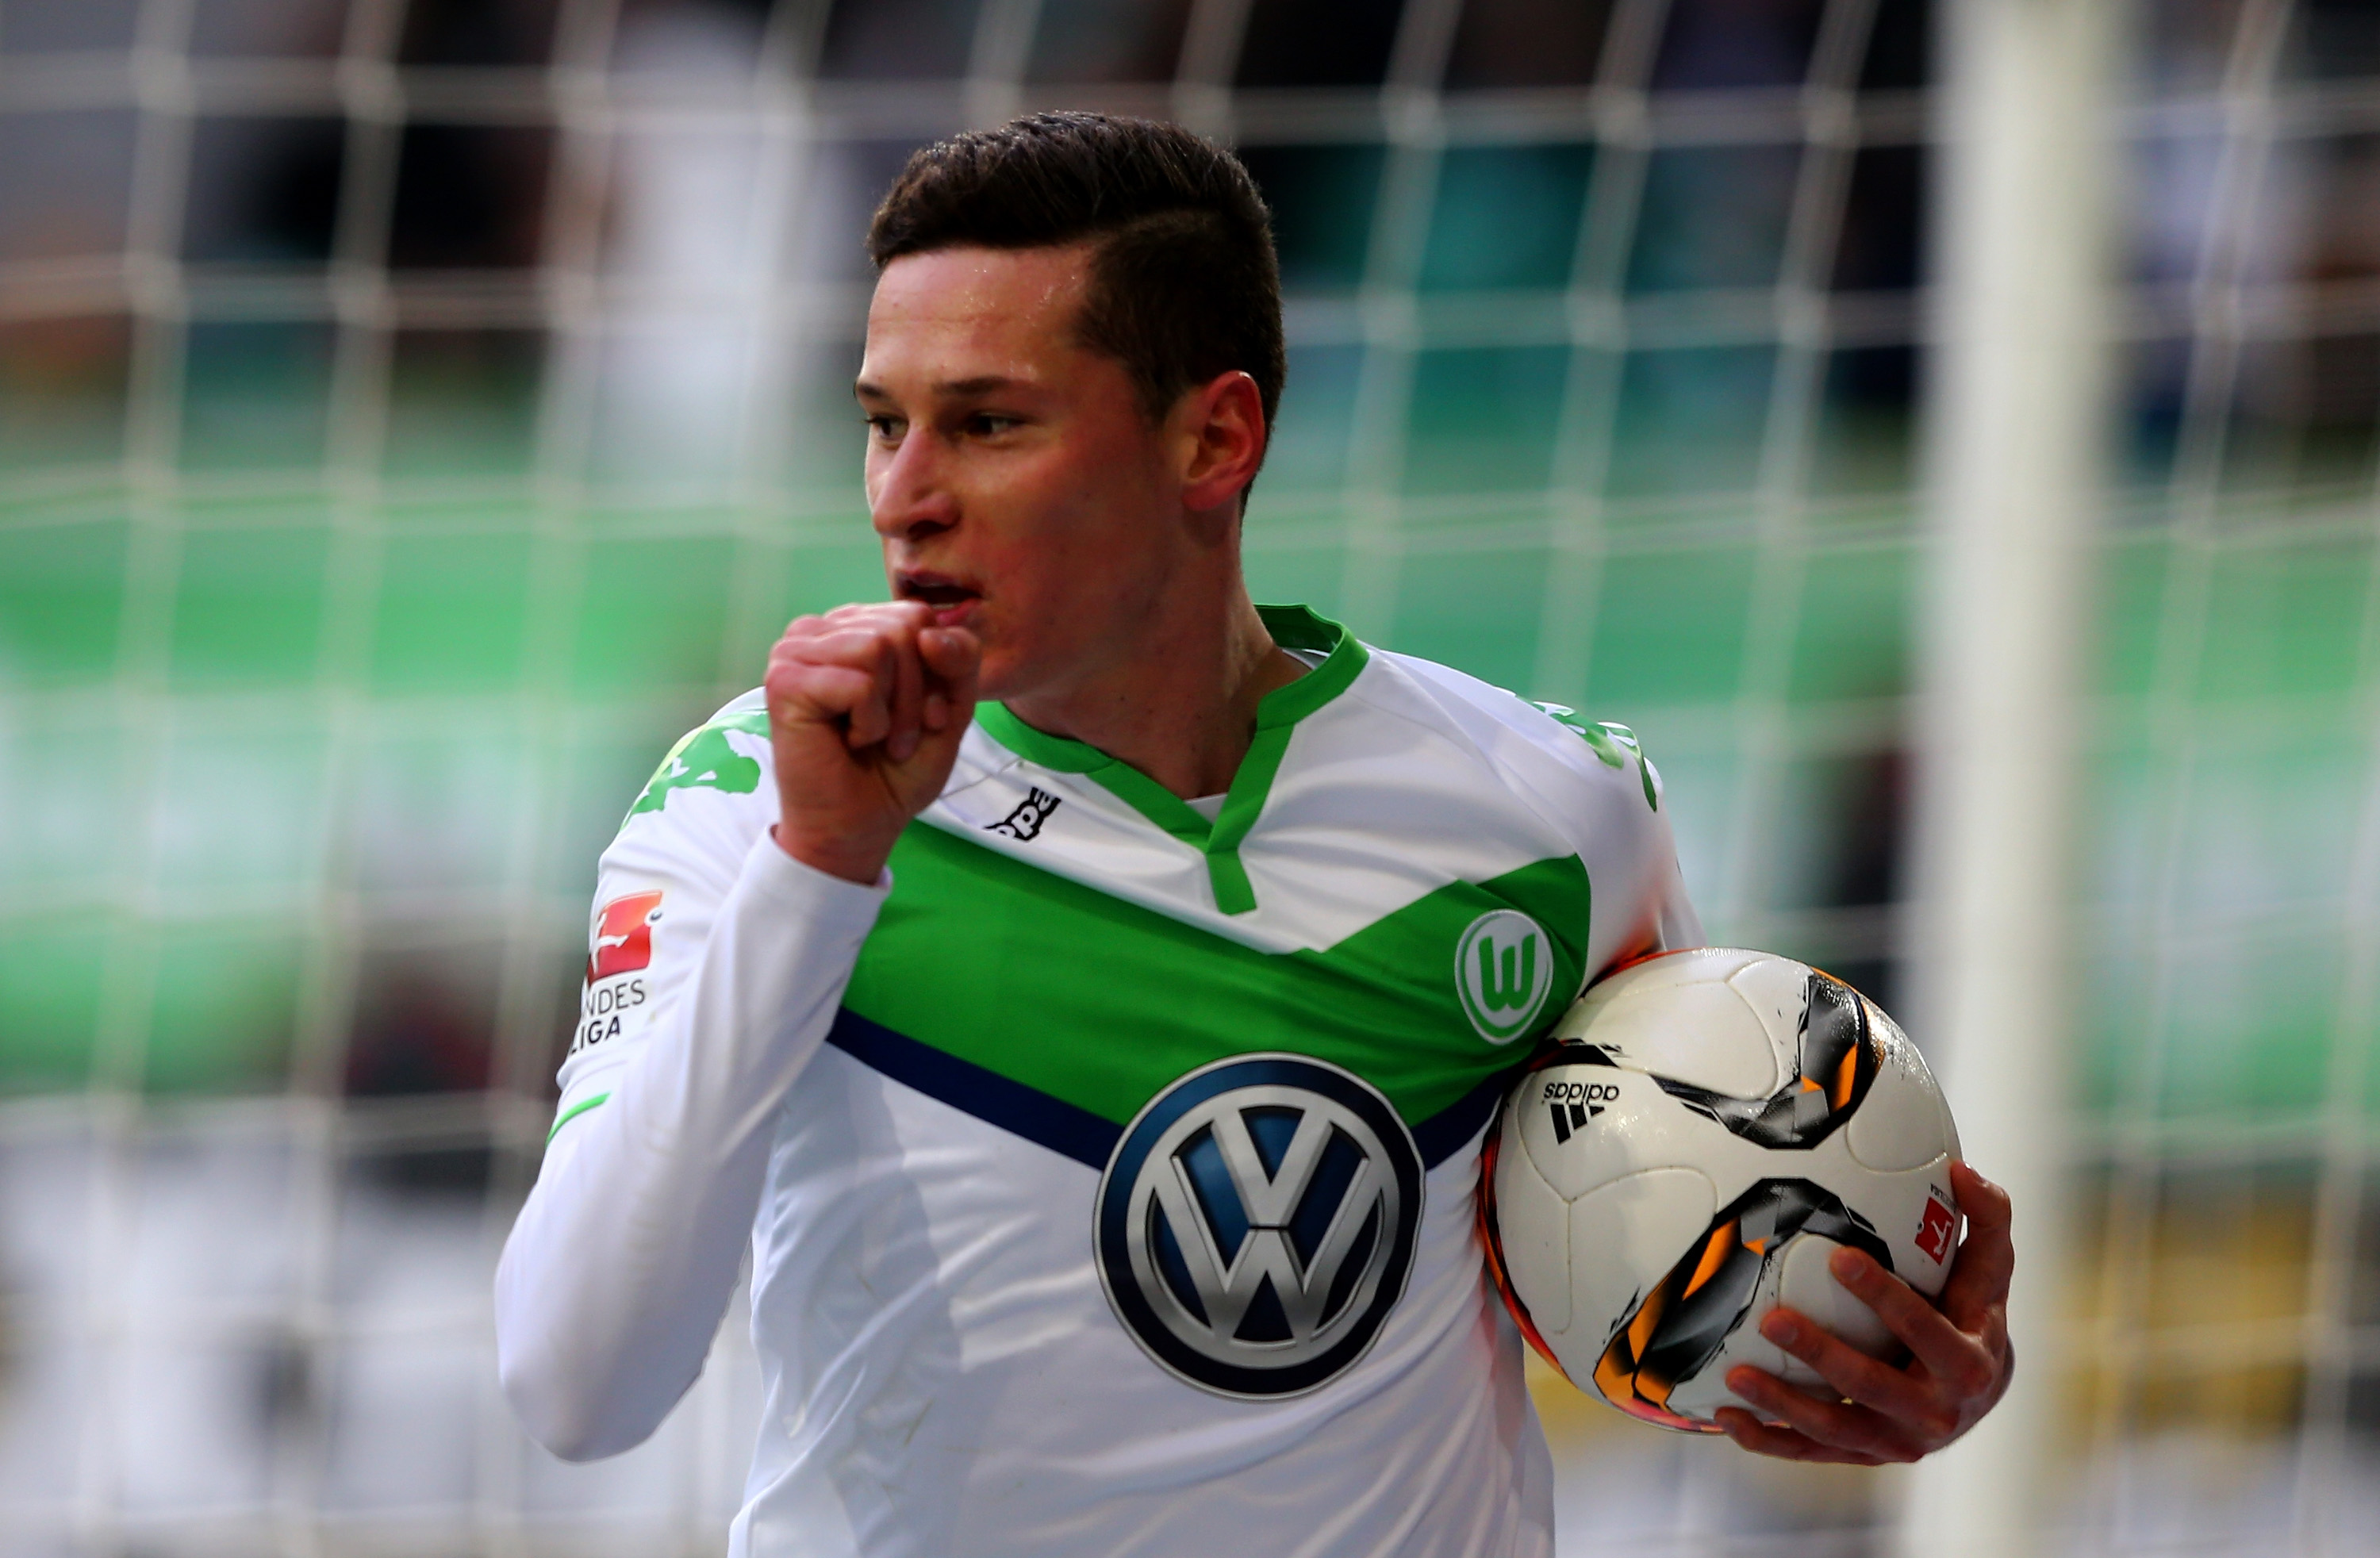 WOLFSBURG, GERMANY - FEBRUARY 13:  Julian Draxler of Wolfsburg celebrates after scoring the opening goal during the Bundesliga match between VfL Wolfsburg and FC Ingolstadt at Volkswagen Arena on February 13, 2016 in Wolfsburg, Germany.  (Photo by Martin Rose/Bongarts/Getty Images)